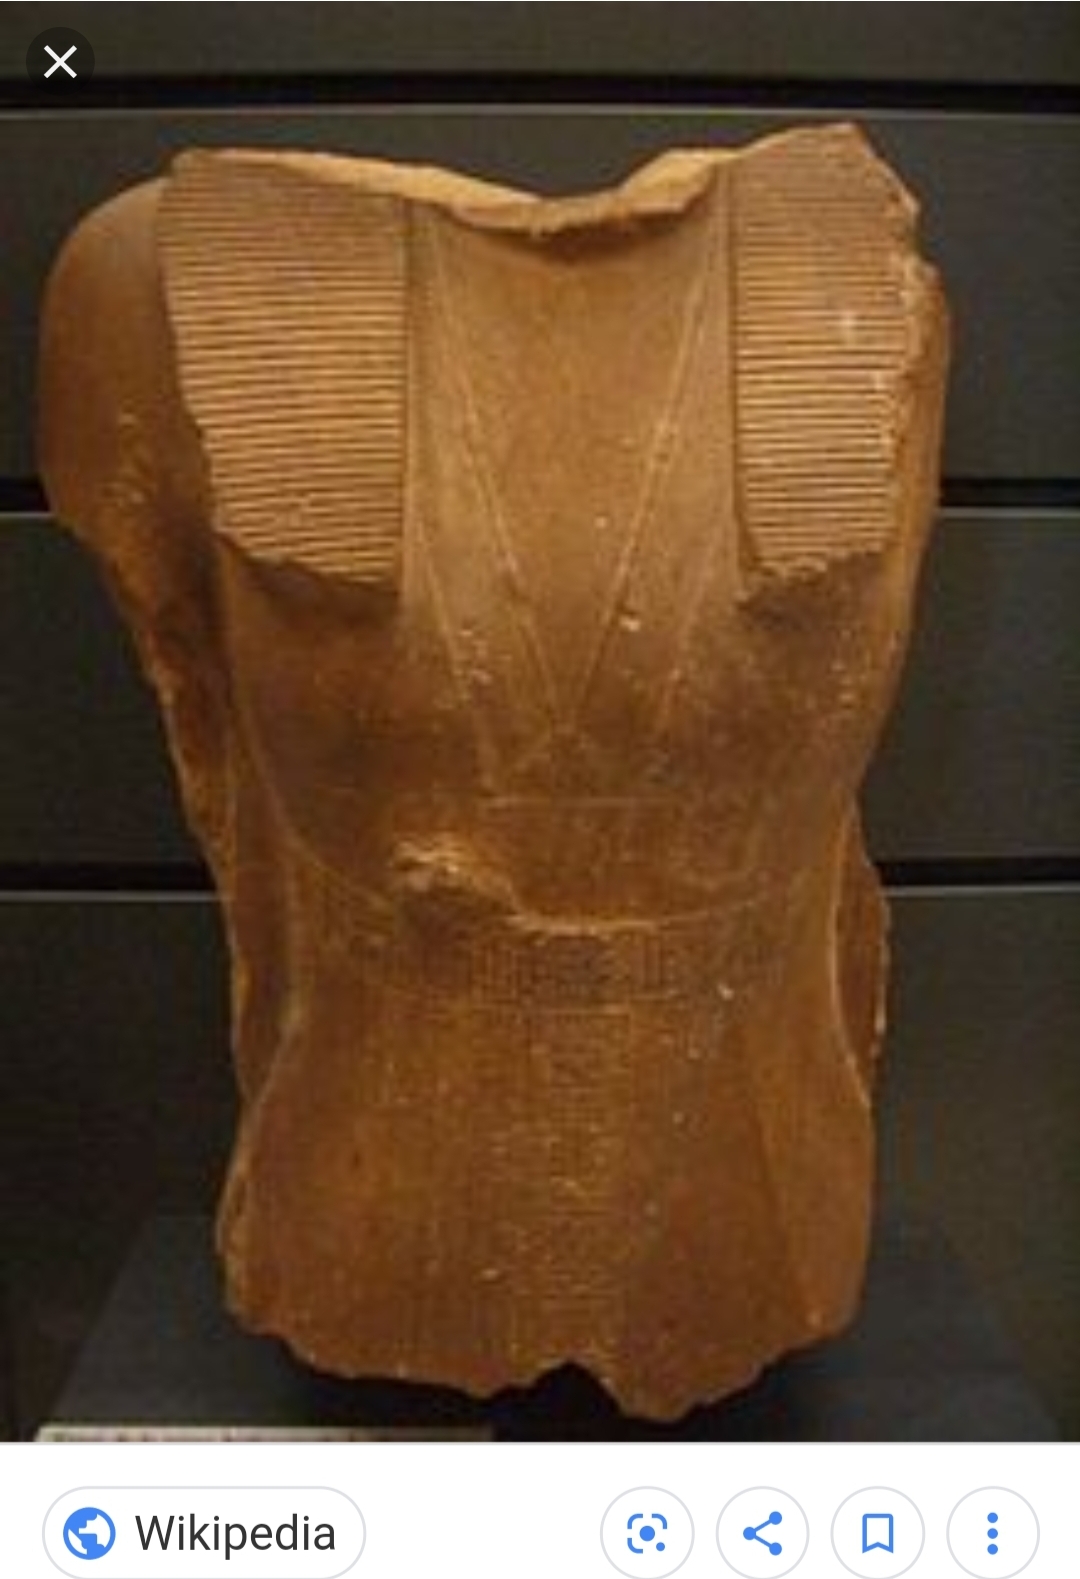 This piece of a statue is one of the few confirmed to depict Sobekneferu